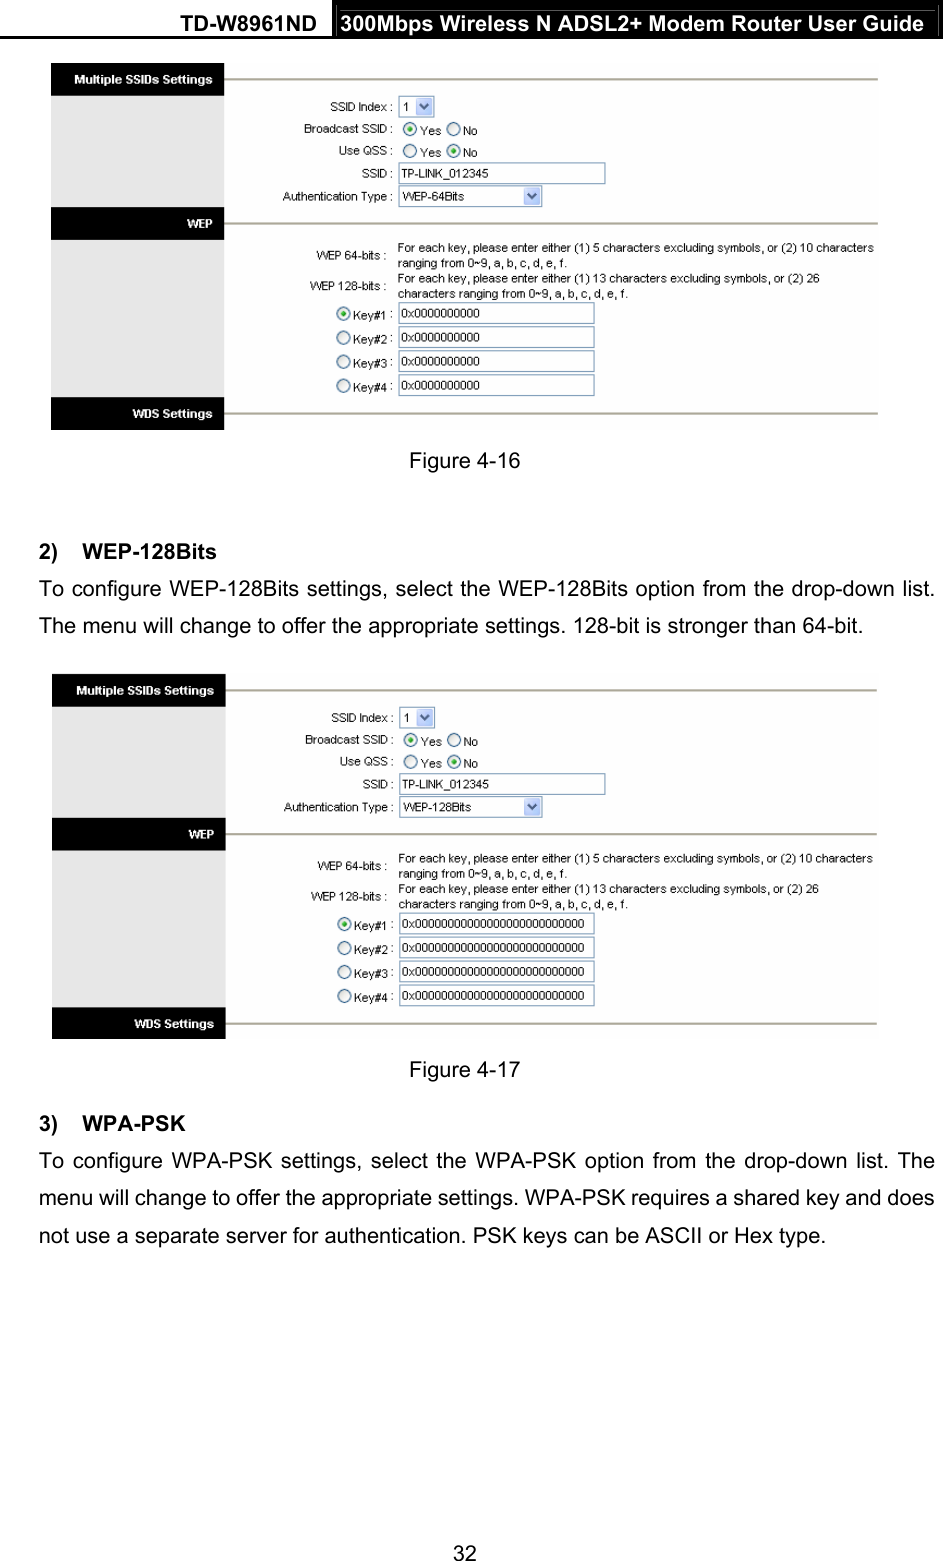 TD-W8961ND  300Mbps Wireless N ADSL2+ Modem Router User Guide  32 Figure 4-16  2) WEP-128Bits To configure WEP-128Bits settings, select the WEP-128Bits option from the drop-down list. The menu will change to offer the appropriate settings. 128-bit is stronger than 64-bit.  Figure 4-17 3) WPA-PSK To configure WPA-PSK settings, select the WPA-PSK option from the drop-down list. The menu will change to offer the appropriate settings. WPA-PSK requires a shared key and does not use a separate server for authentication. PSK keys can be ASCII or Hex type. 